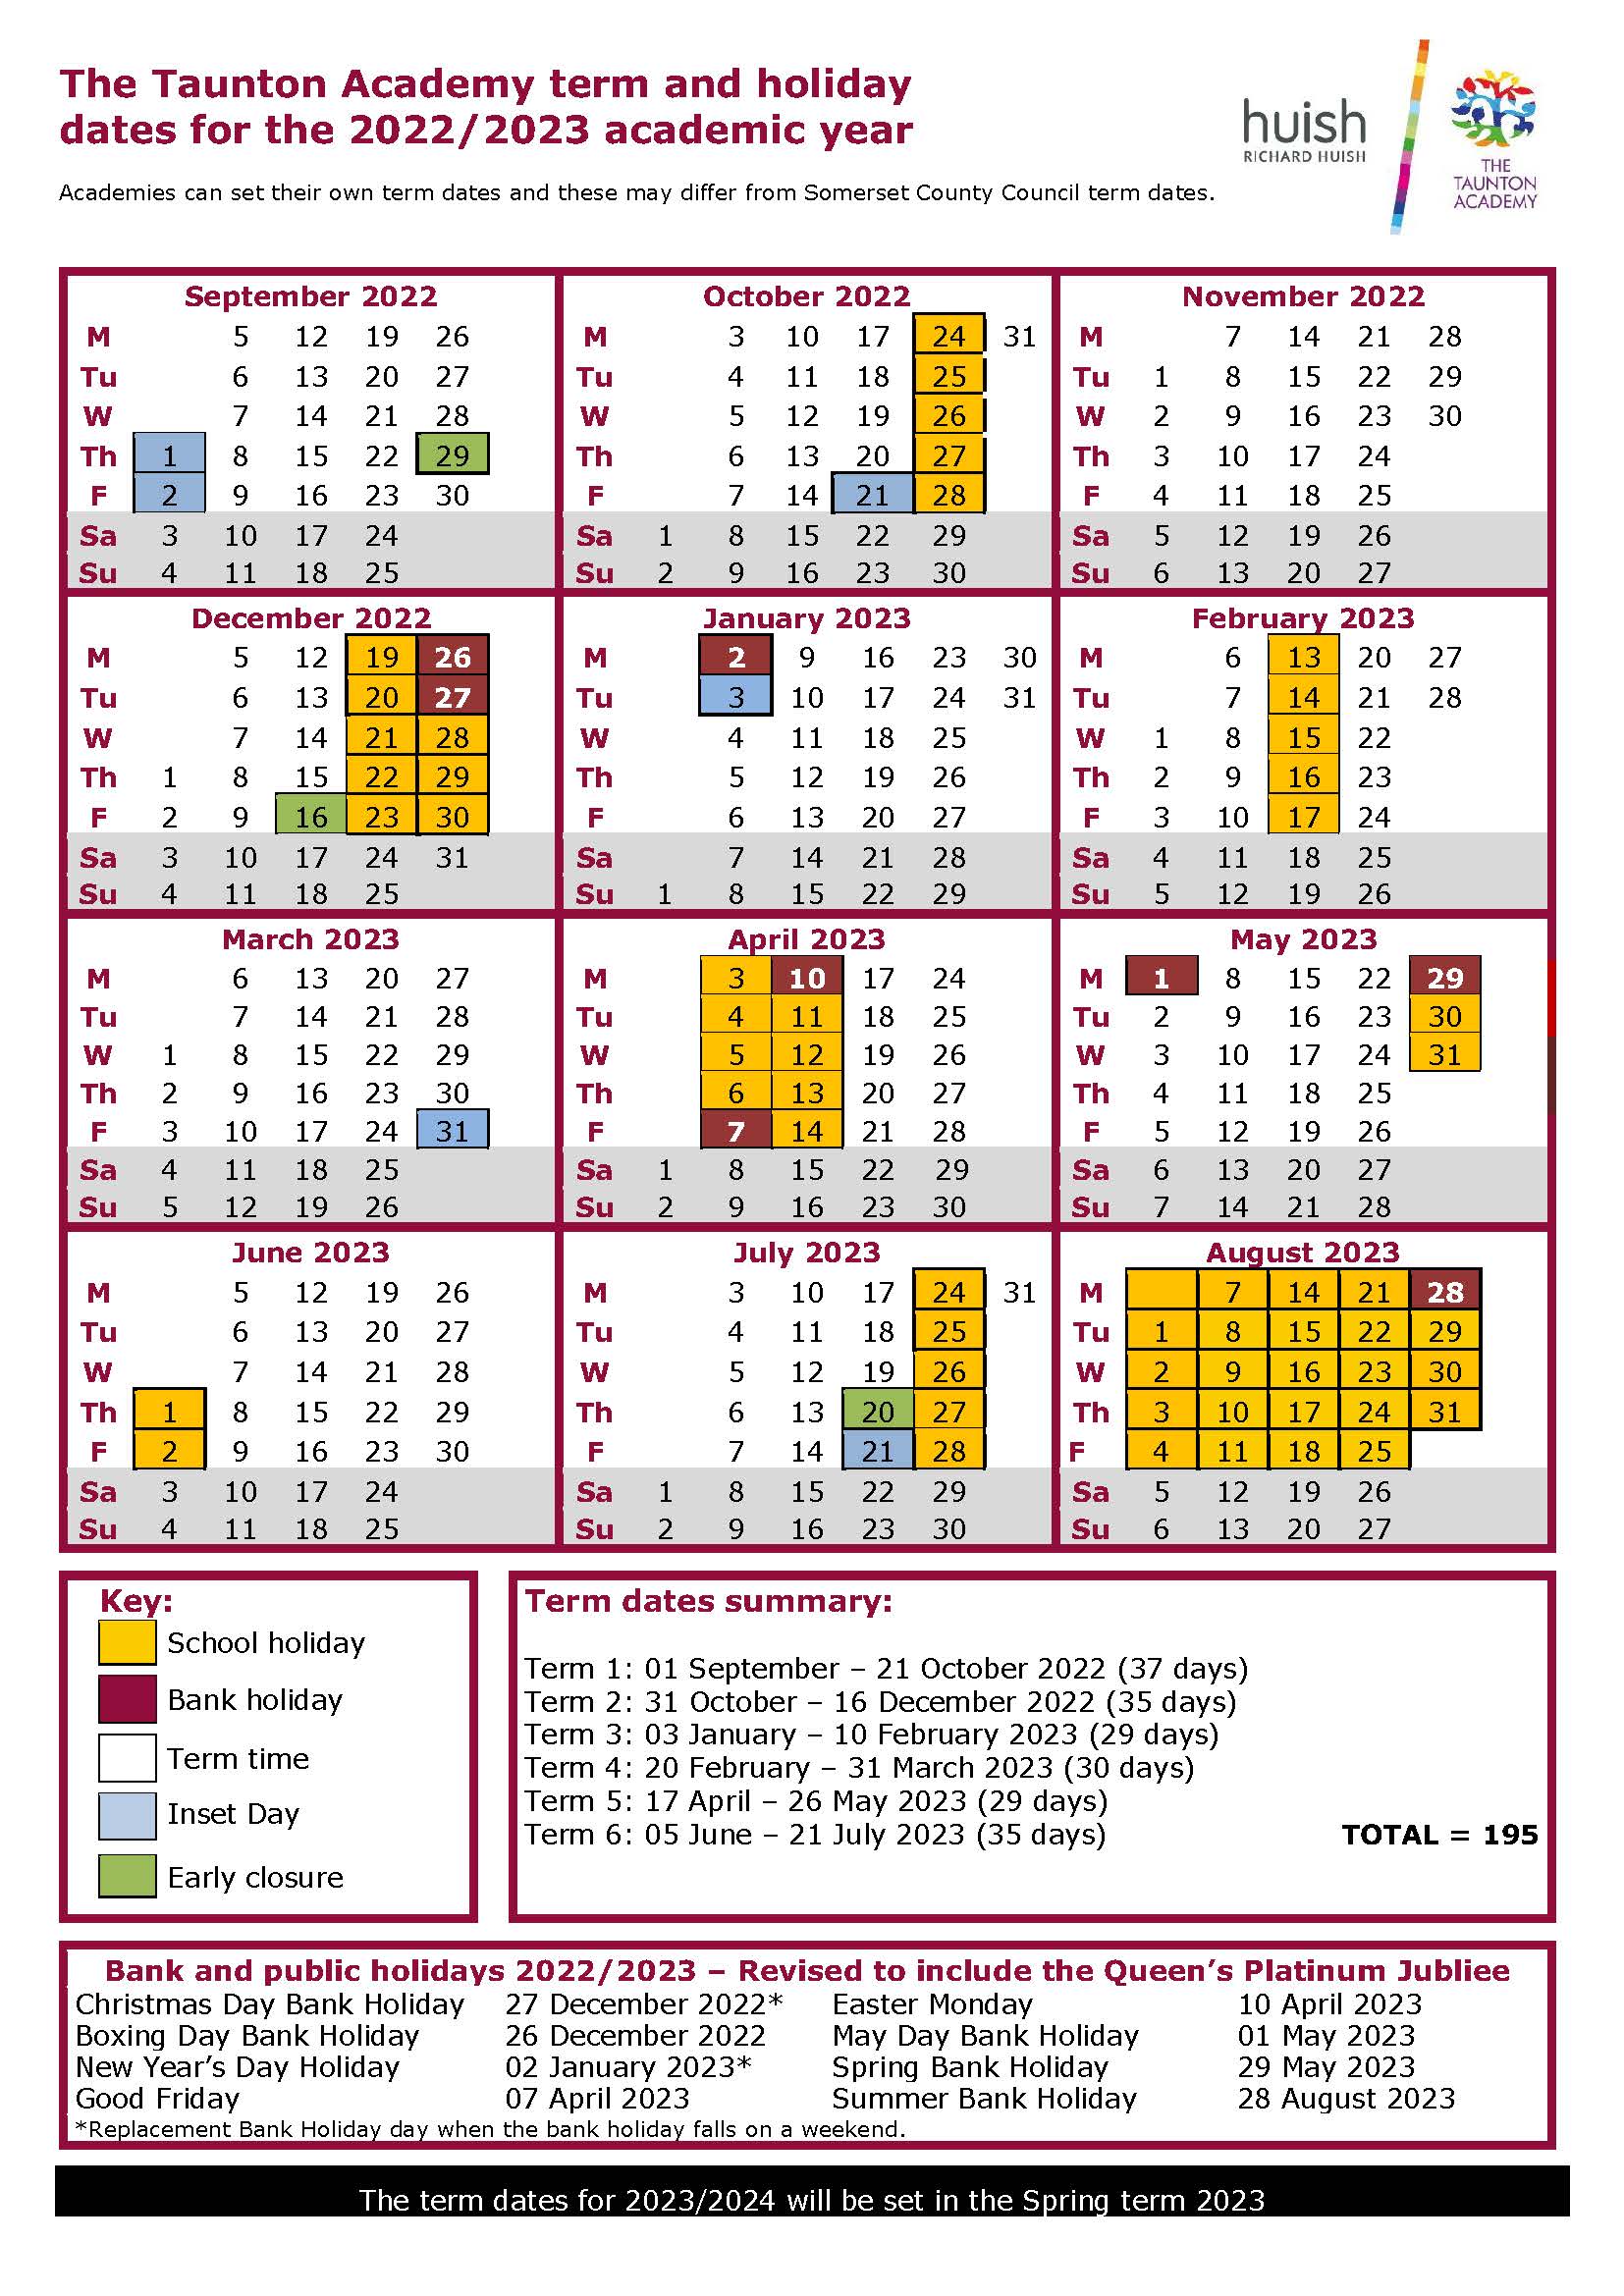 An image of the Term Dates for the 2022 - 2023 Academic Year